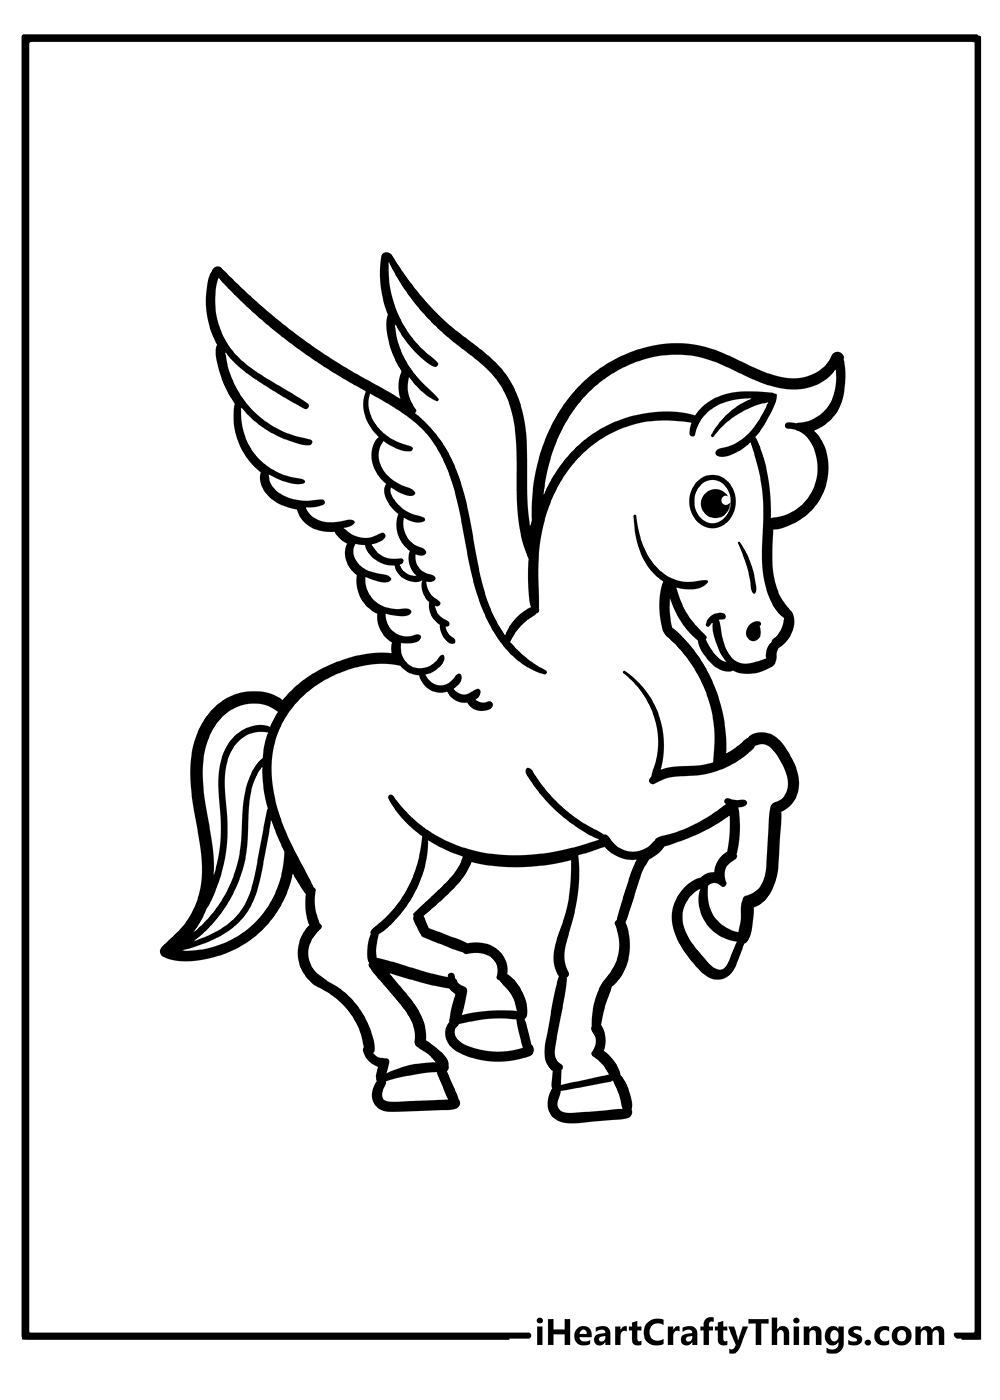 Pegasus Coloring Pages for kids free download